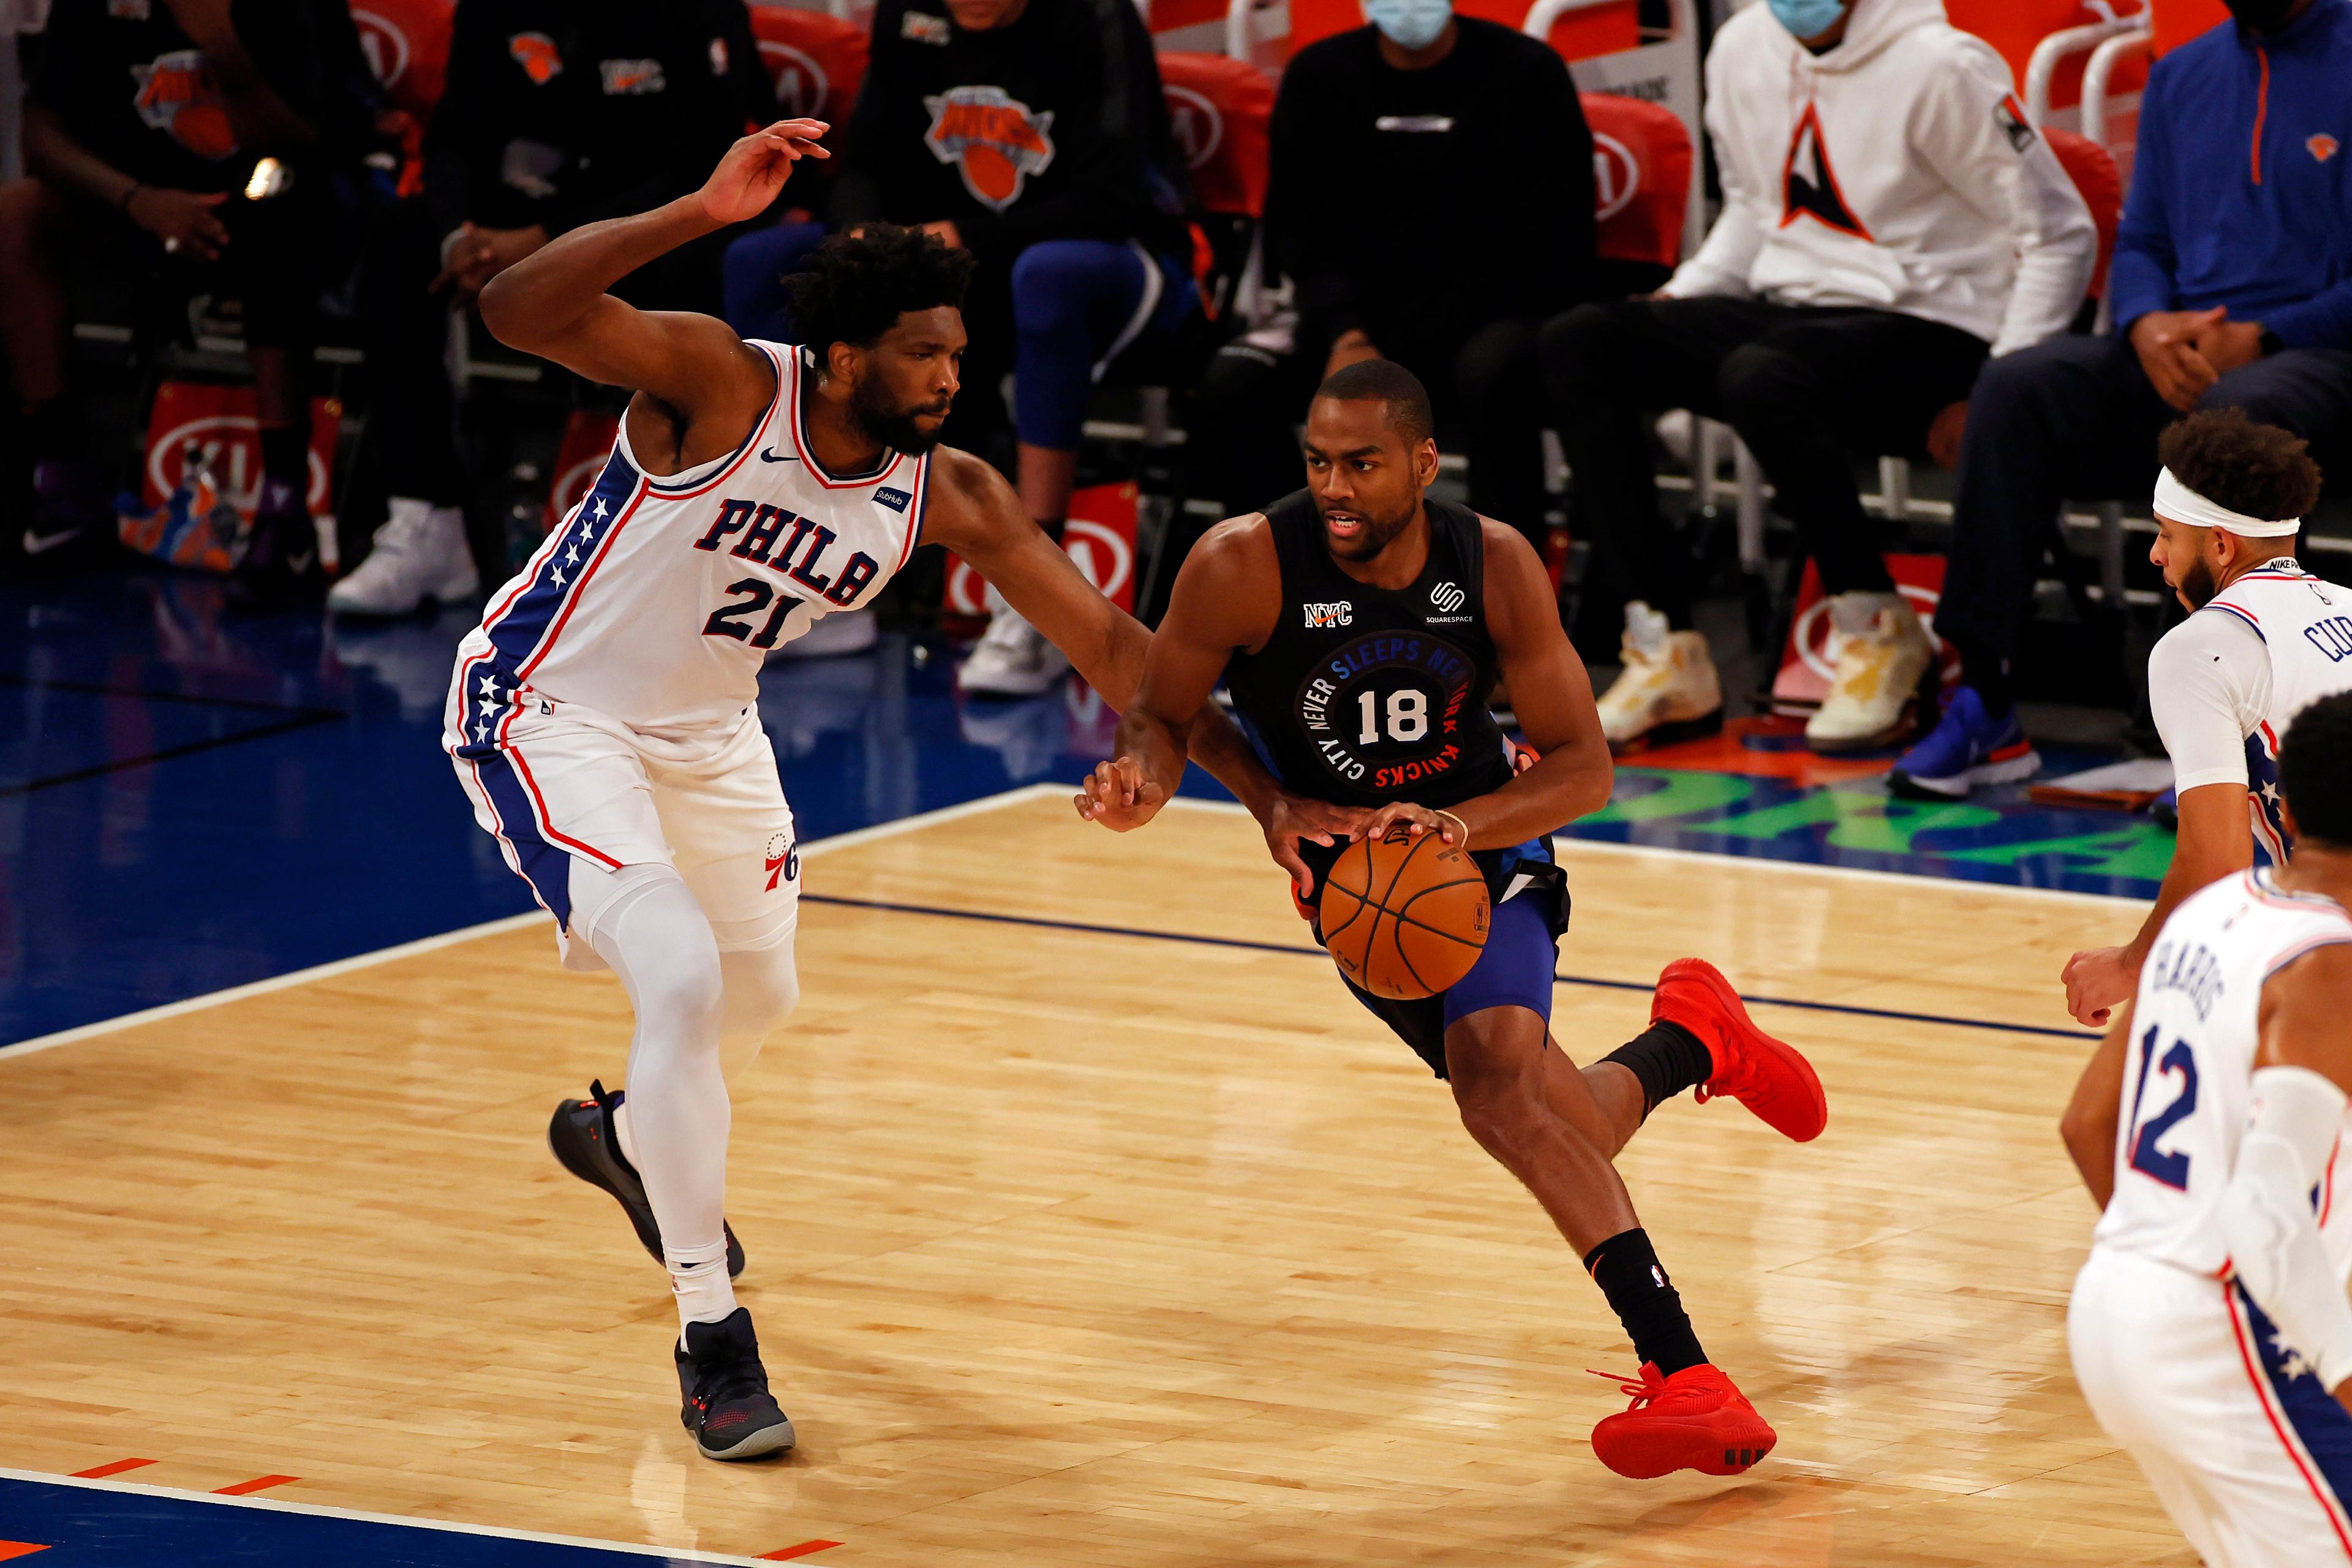 Dec 26, 2020; New York, New York, USA; New York Knicks guard Alec Burks (18) drives to the basket past Philadelphia 76ers center Joel Embiid (21) during the first half of an NBA basketball game Saturday, Dec. 26, 2020, in New York. The 76ers defeated the Knicks 109-89 at Madison Square Garden. / © POOL PHOTOS-USA TODAY Sports